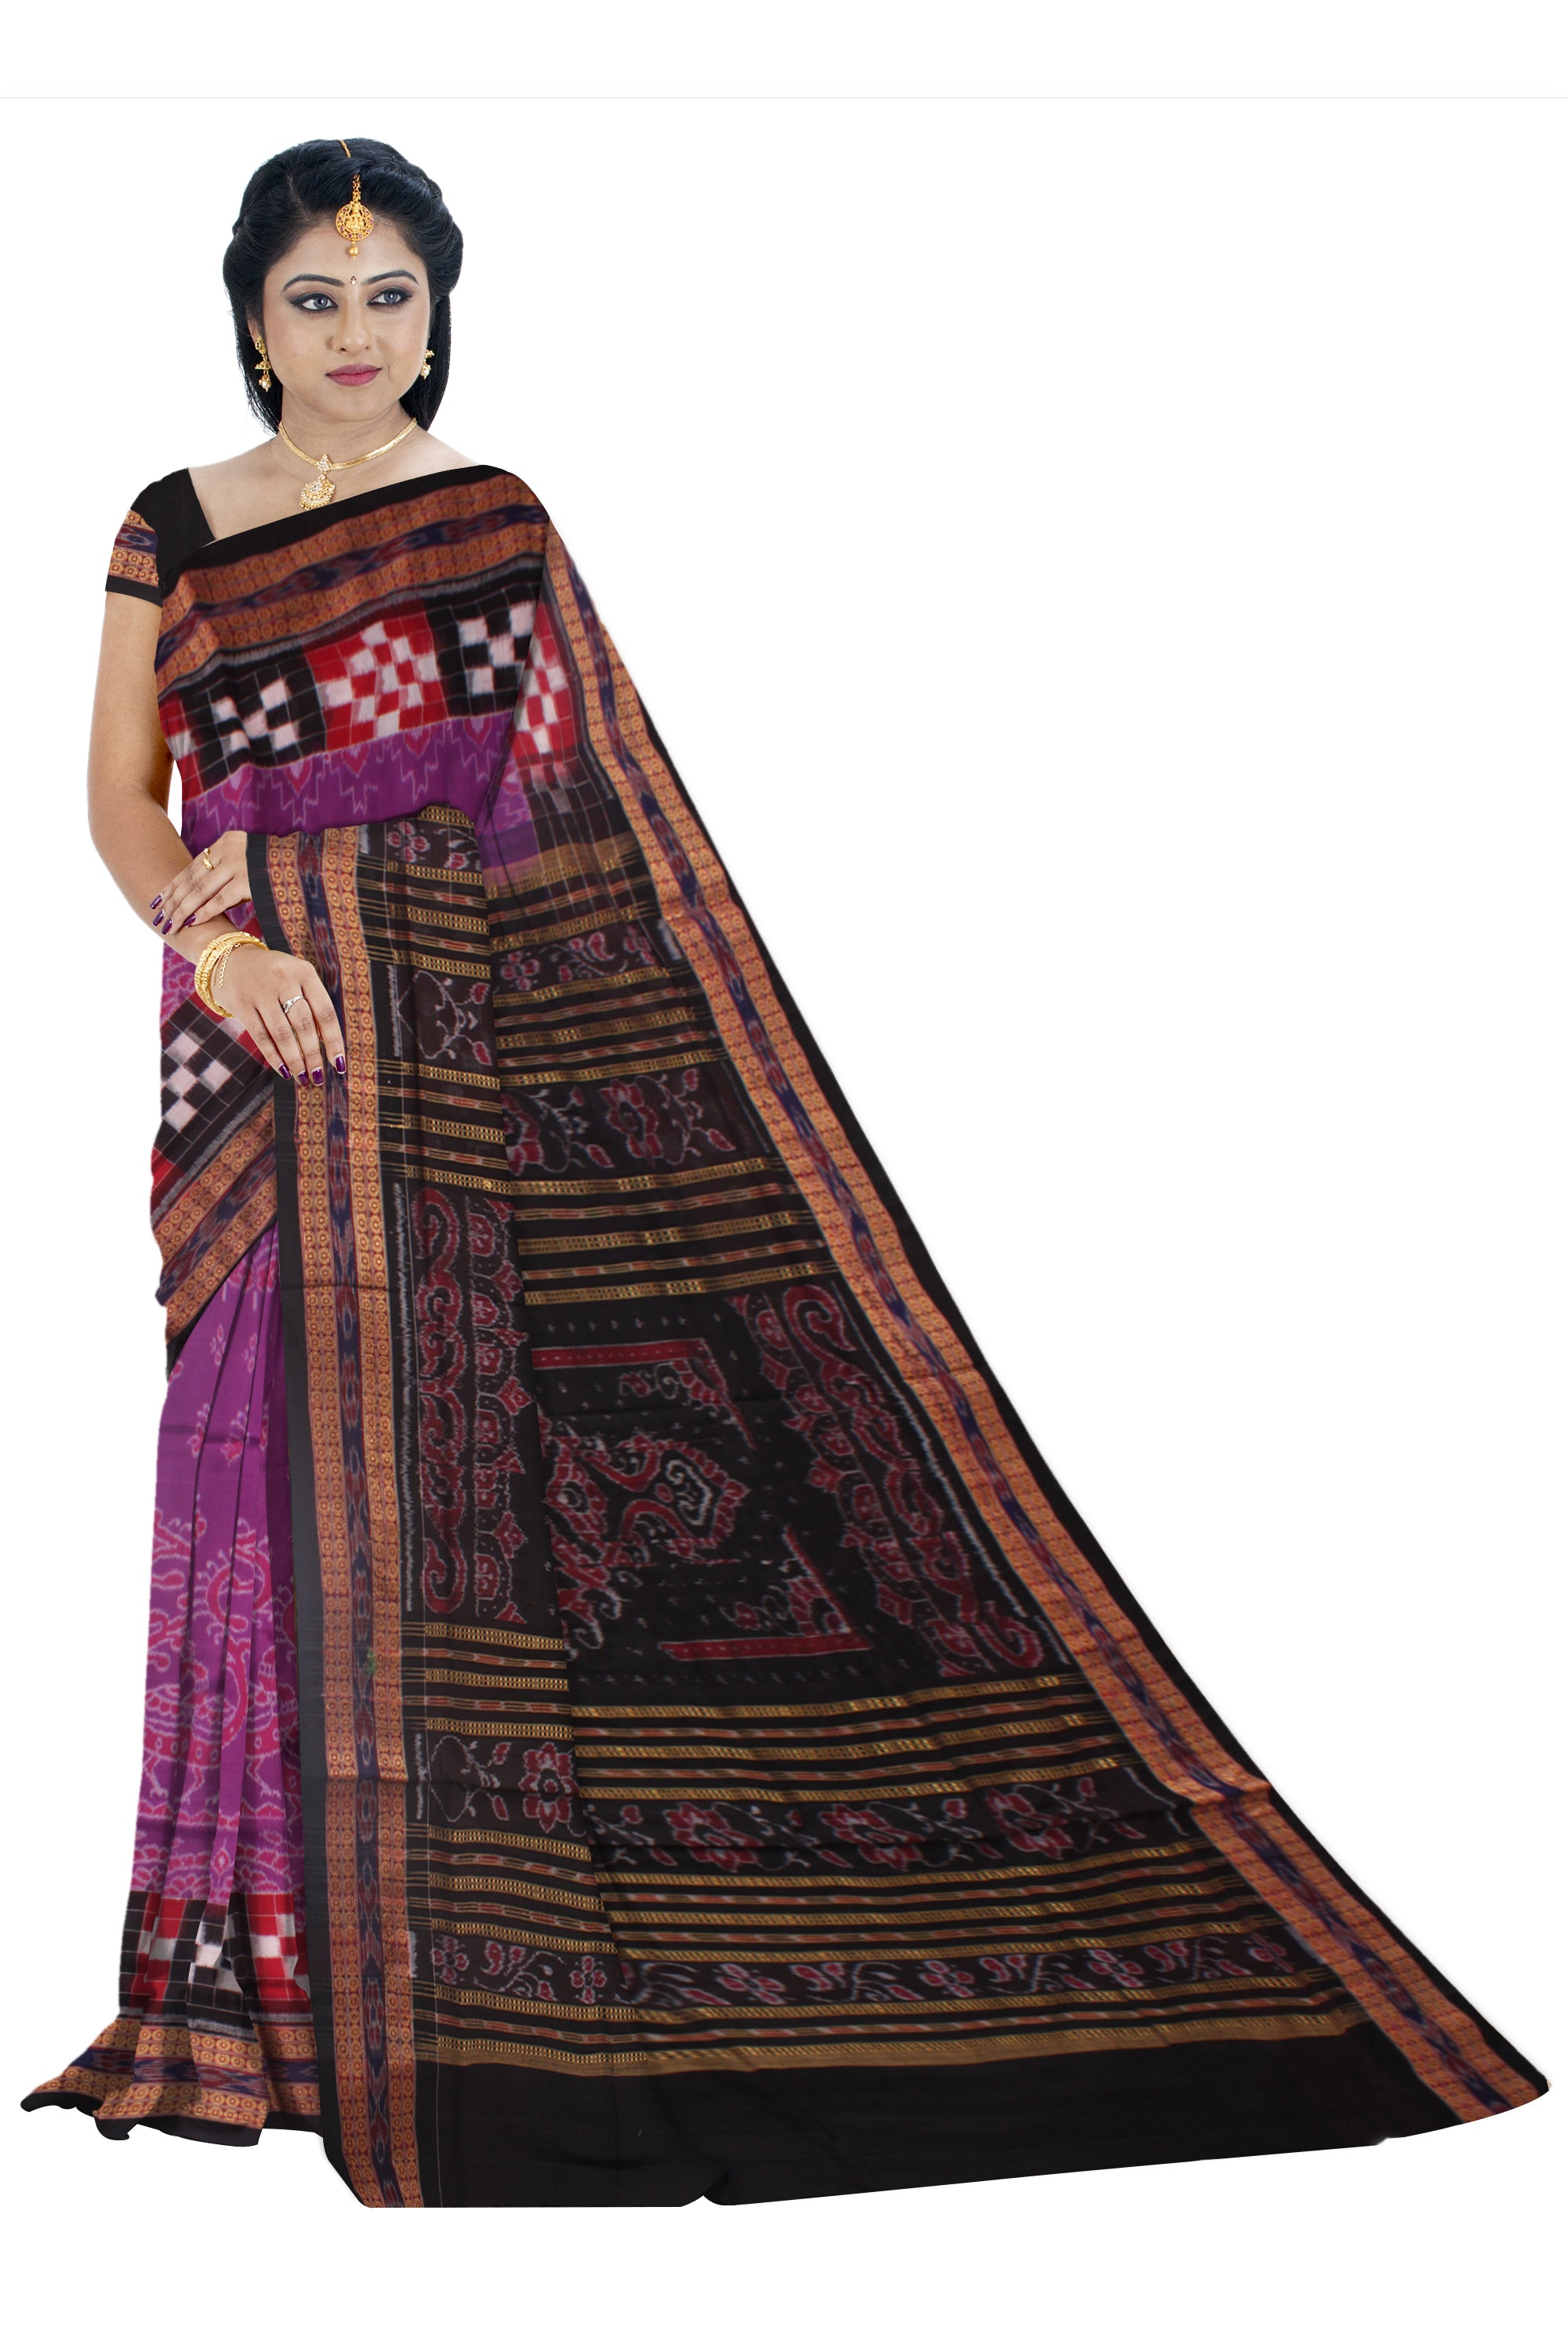 DARK VIOLET AND BLACK COLOR  TRADITIONAL PASAPALI WITH PEACOCK PRINT PURE COTTON SAREE, WITH BLOUSE PIECE. - Koshali Arts & Crafts Enterprise